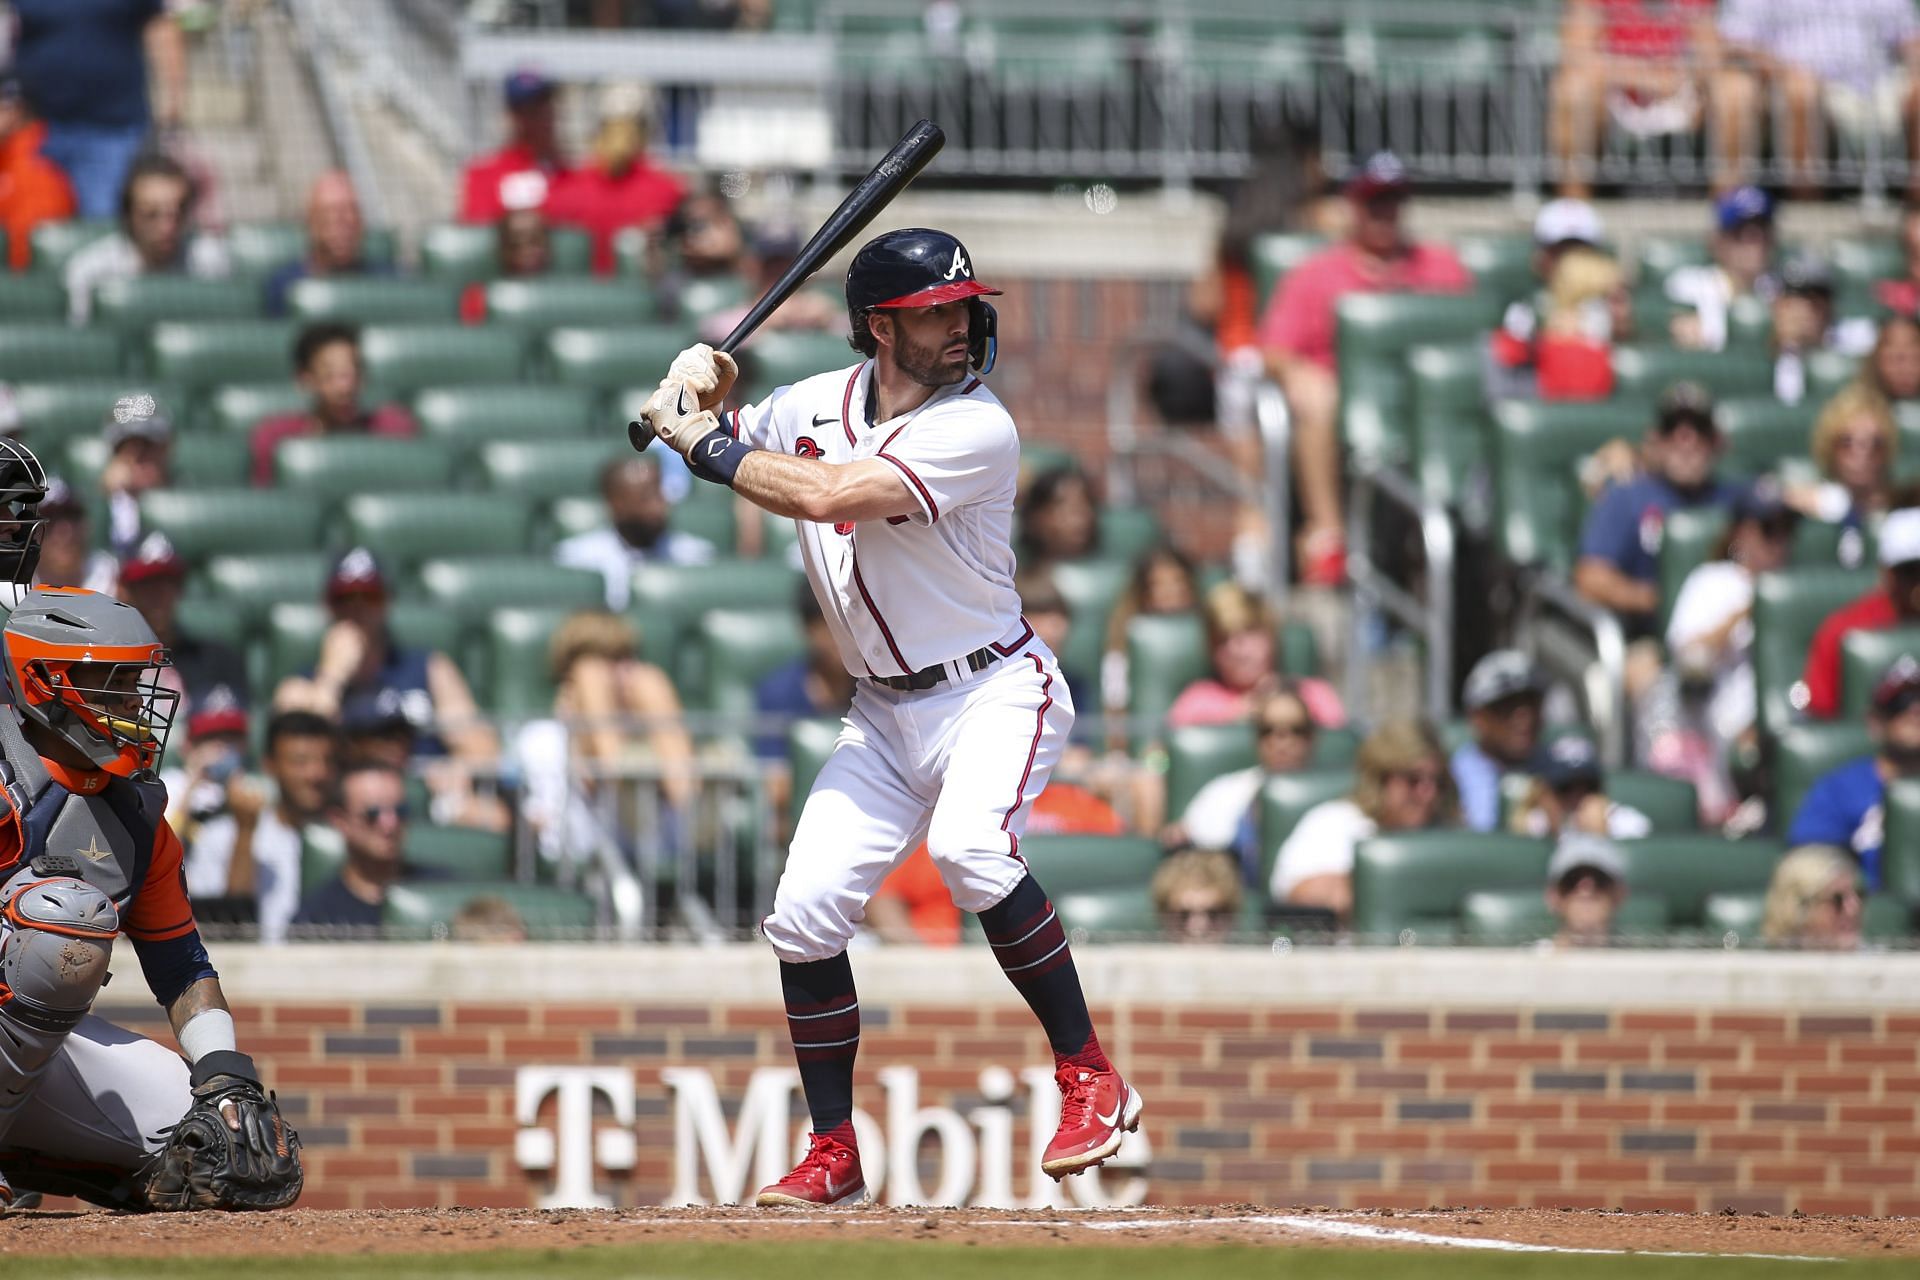 Dansby Swanson signing: With shiny new shortstop, Cubs should get